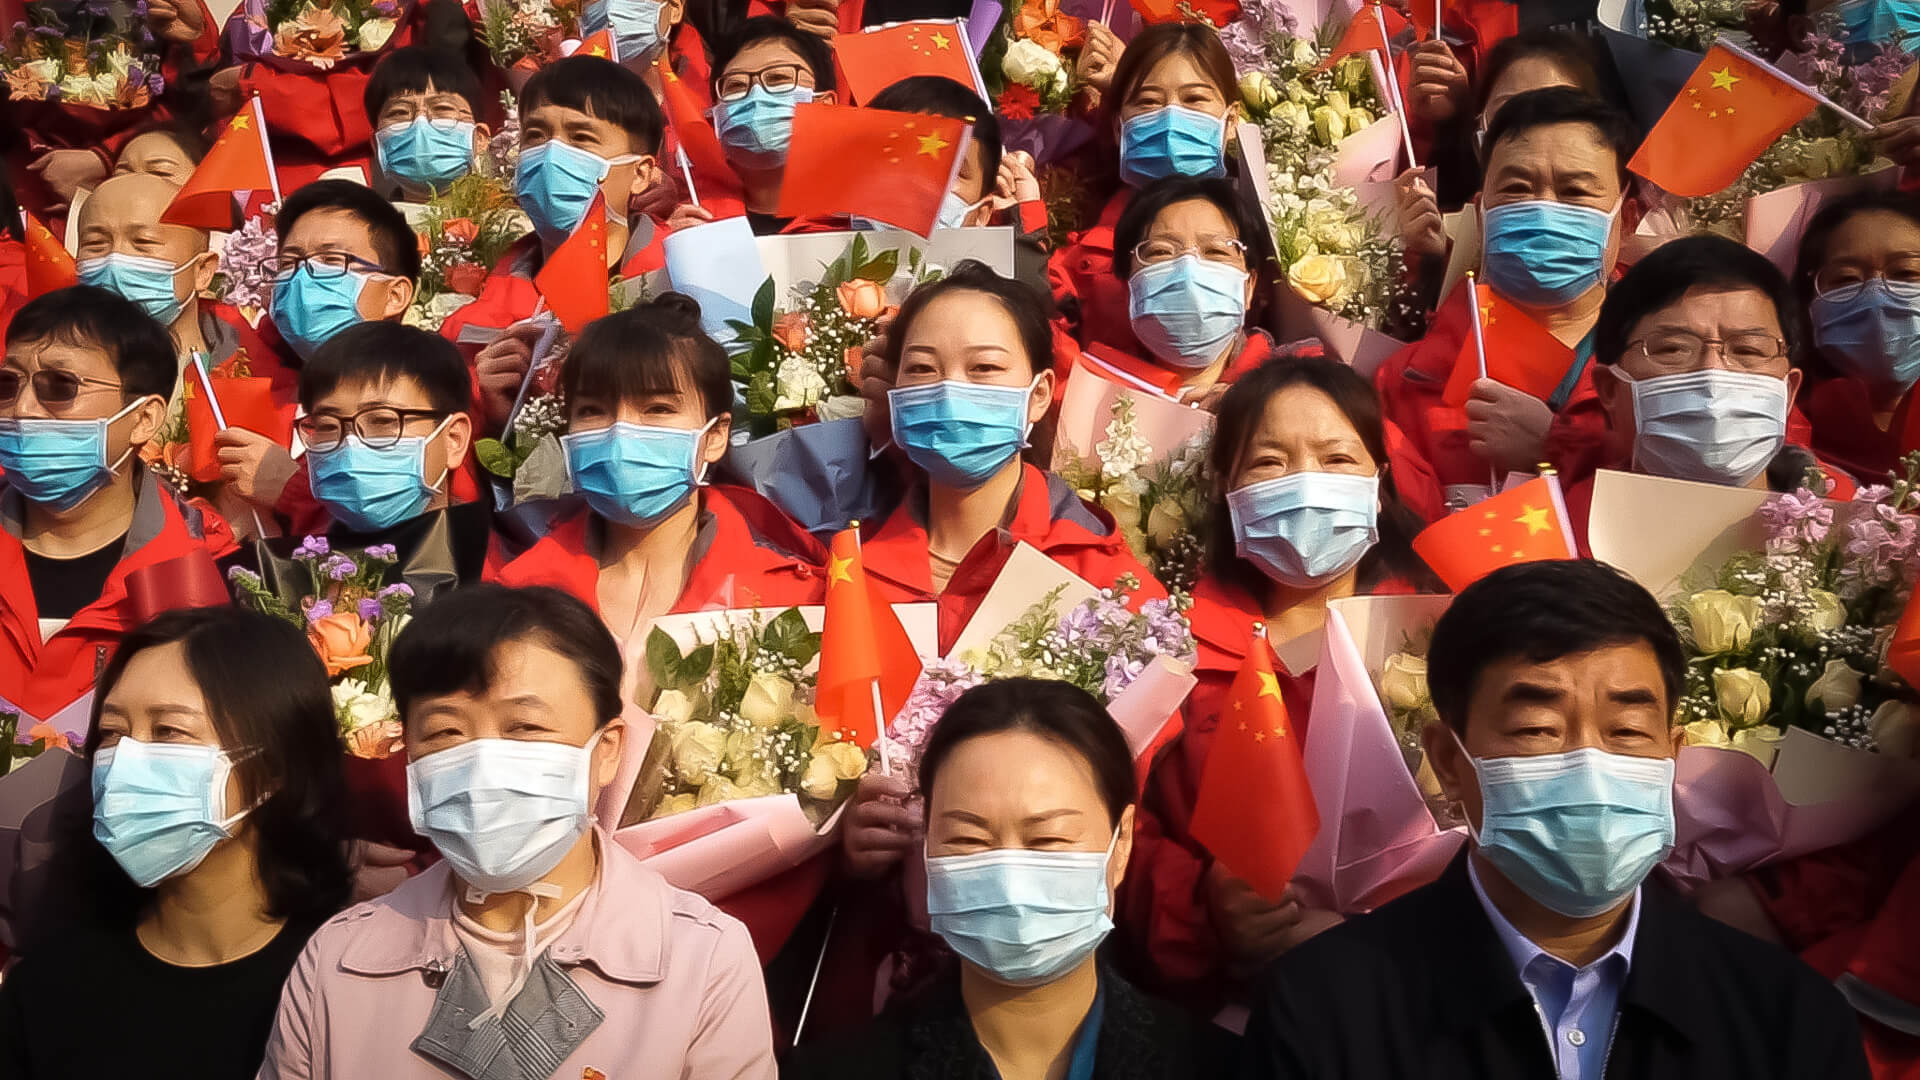 Still from In the Same Breath, a film produced by Jialing Zhang. Group portrait of Chinese men and women who are standing shoulder to shoulder in stadium-style rows. They are holding Chinese flags and some women are holding bouquets of flowers. They are all wearing blue surgical masks.